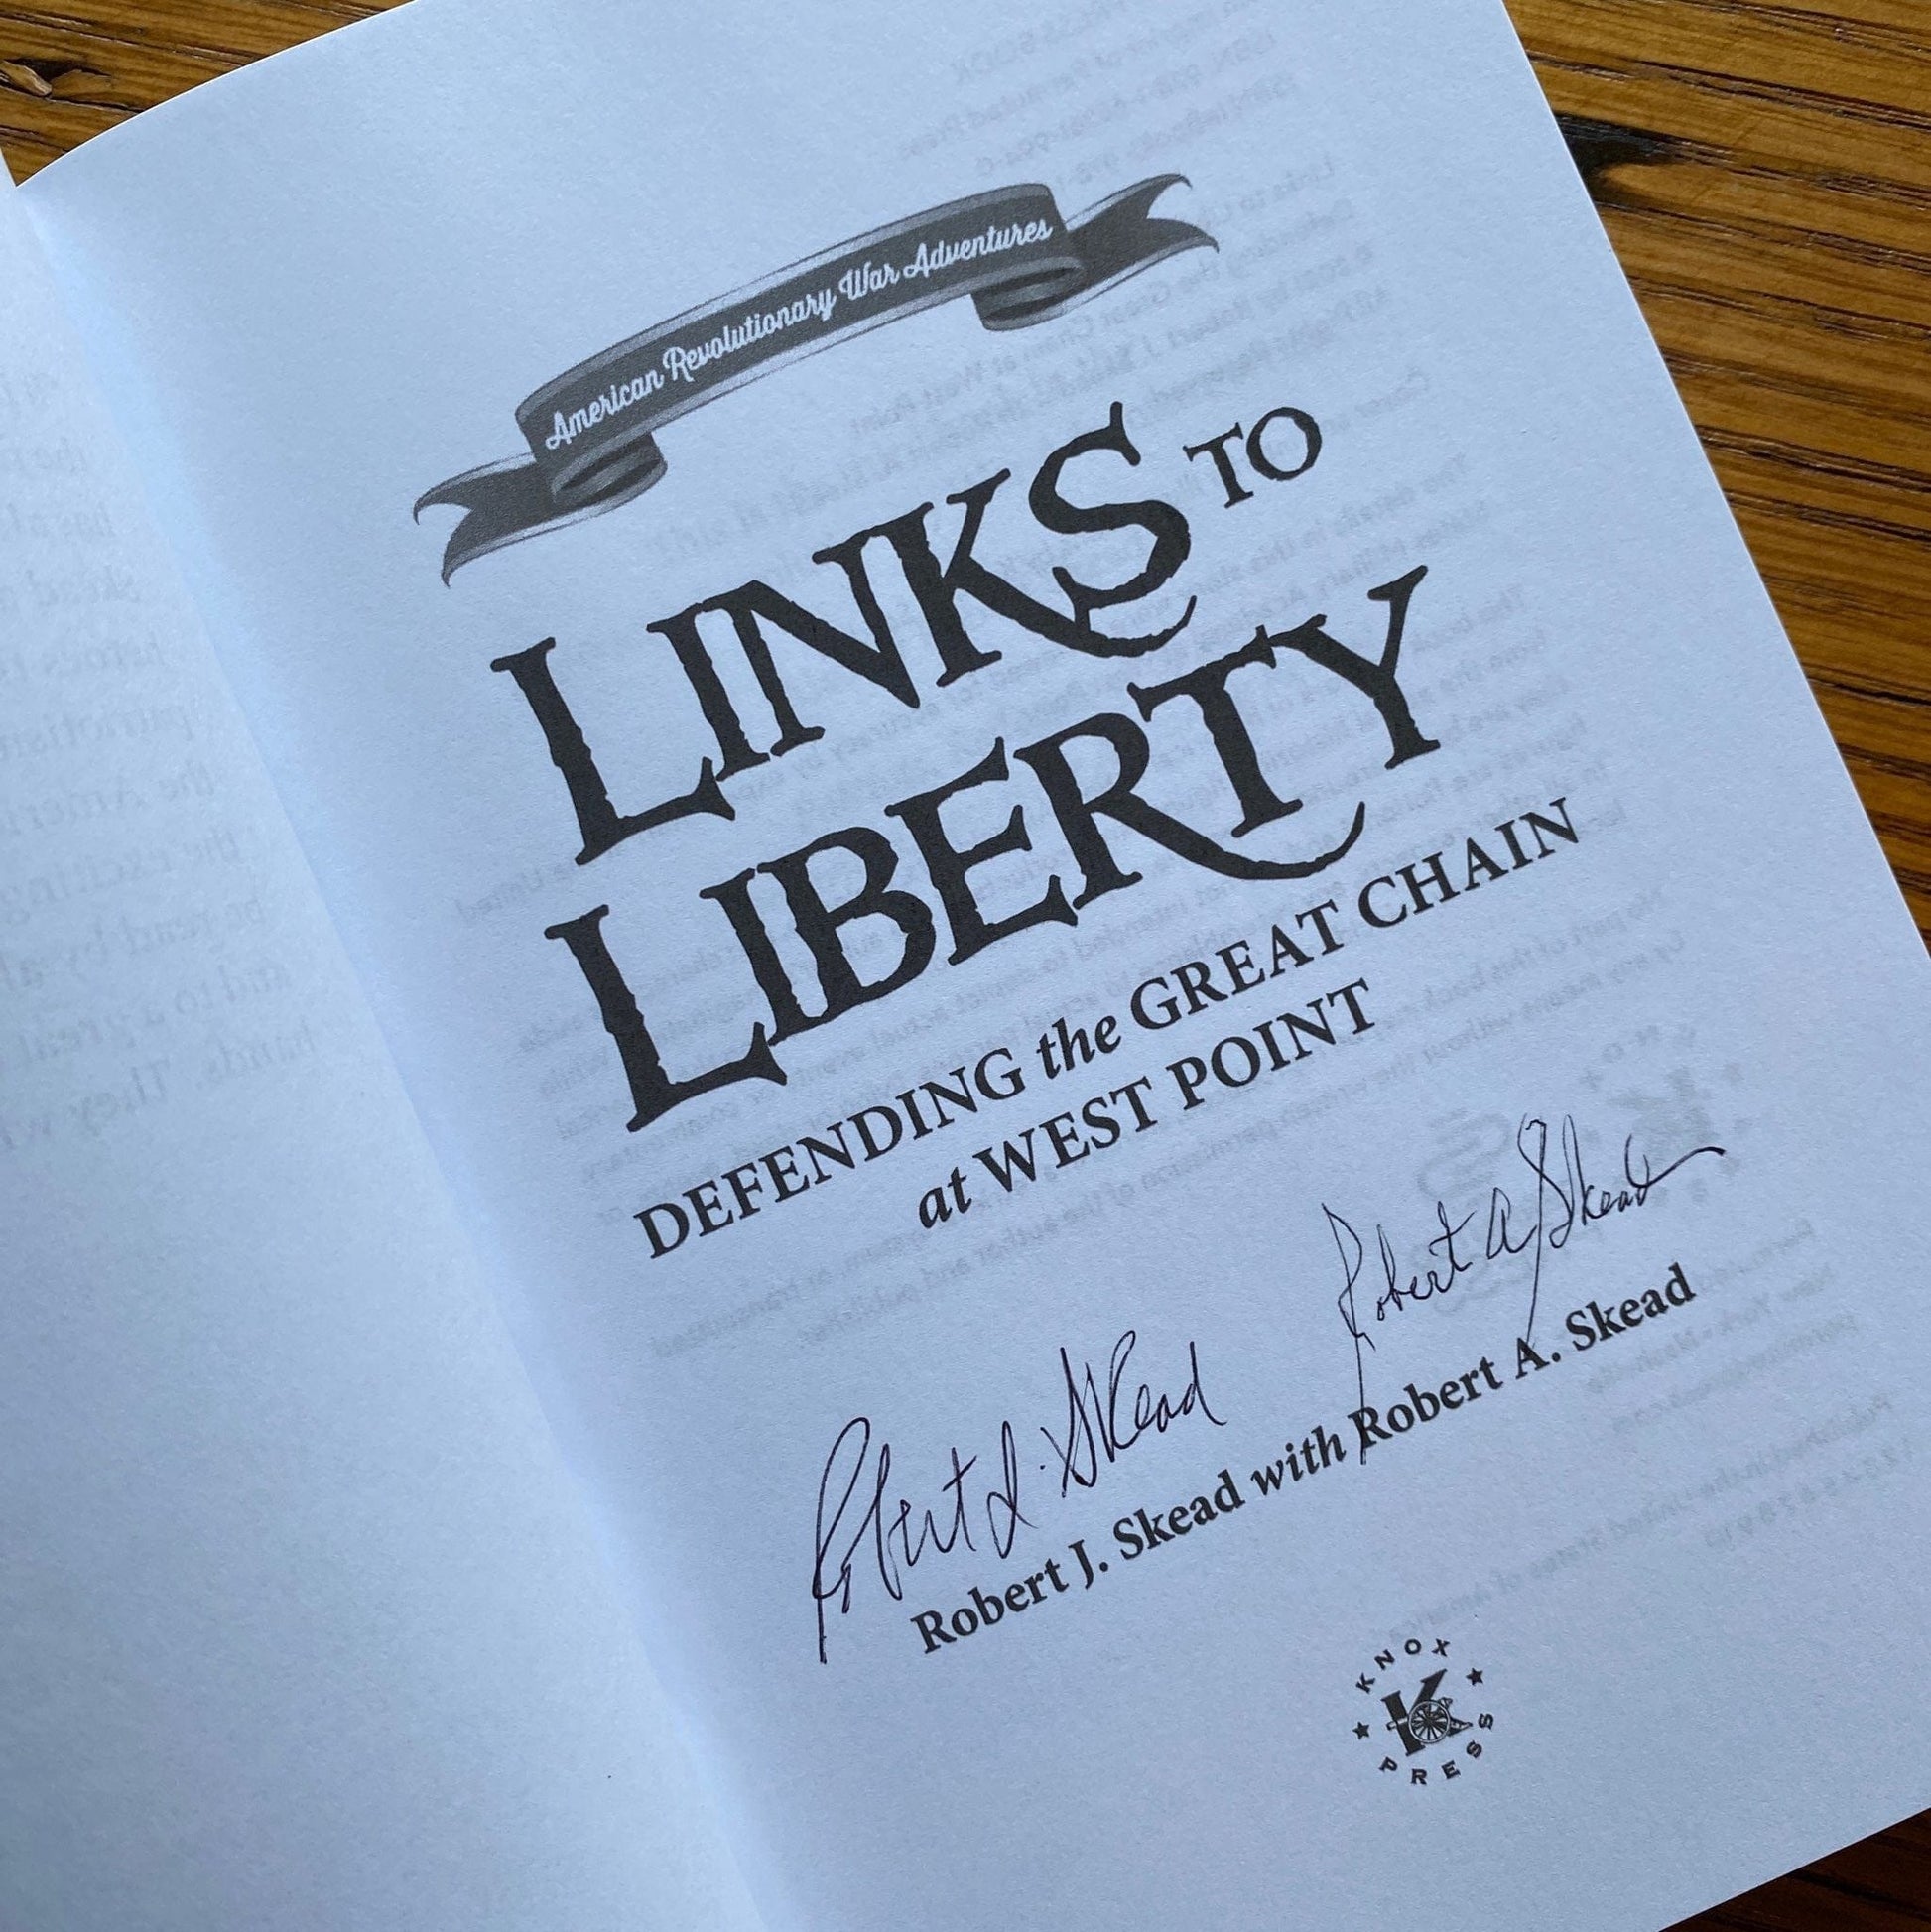 "Links to Liberty: Defending the Great Chain at West Point" - Signed by the Authors, Robert J. Skead and Robert A. Skead from The History List store